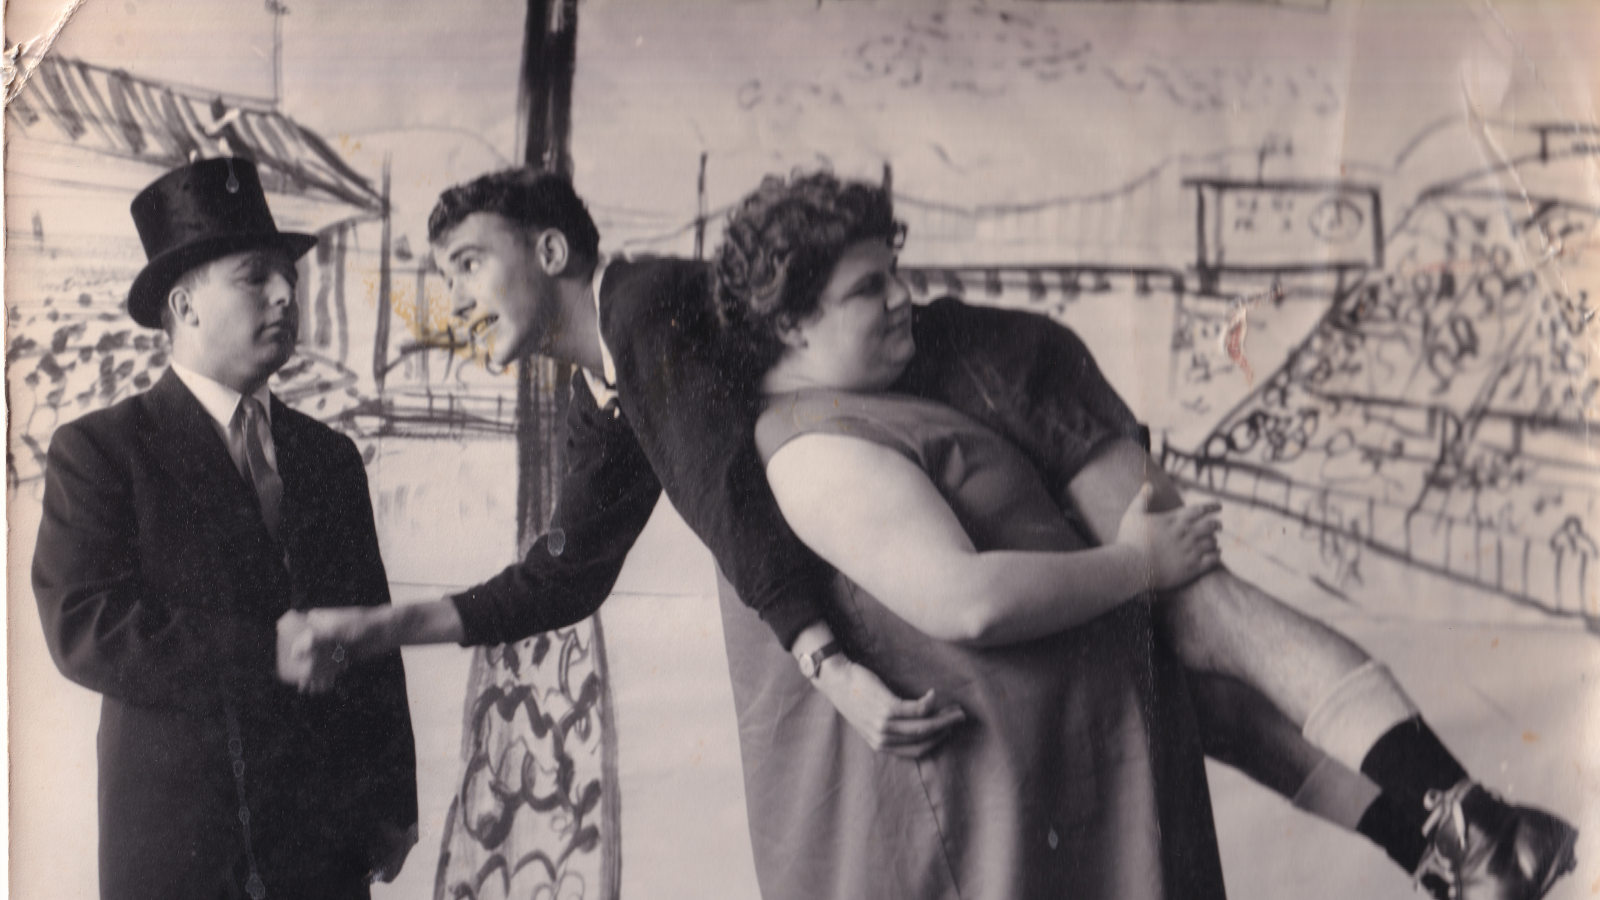 A restored photo from the 1960s of a woman carrying a man over her shoulder.